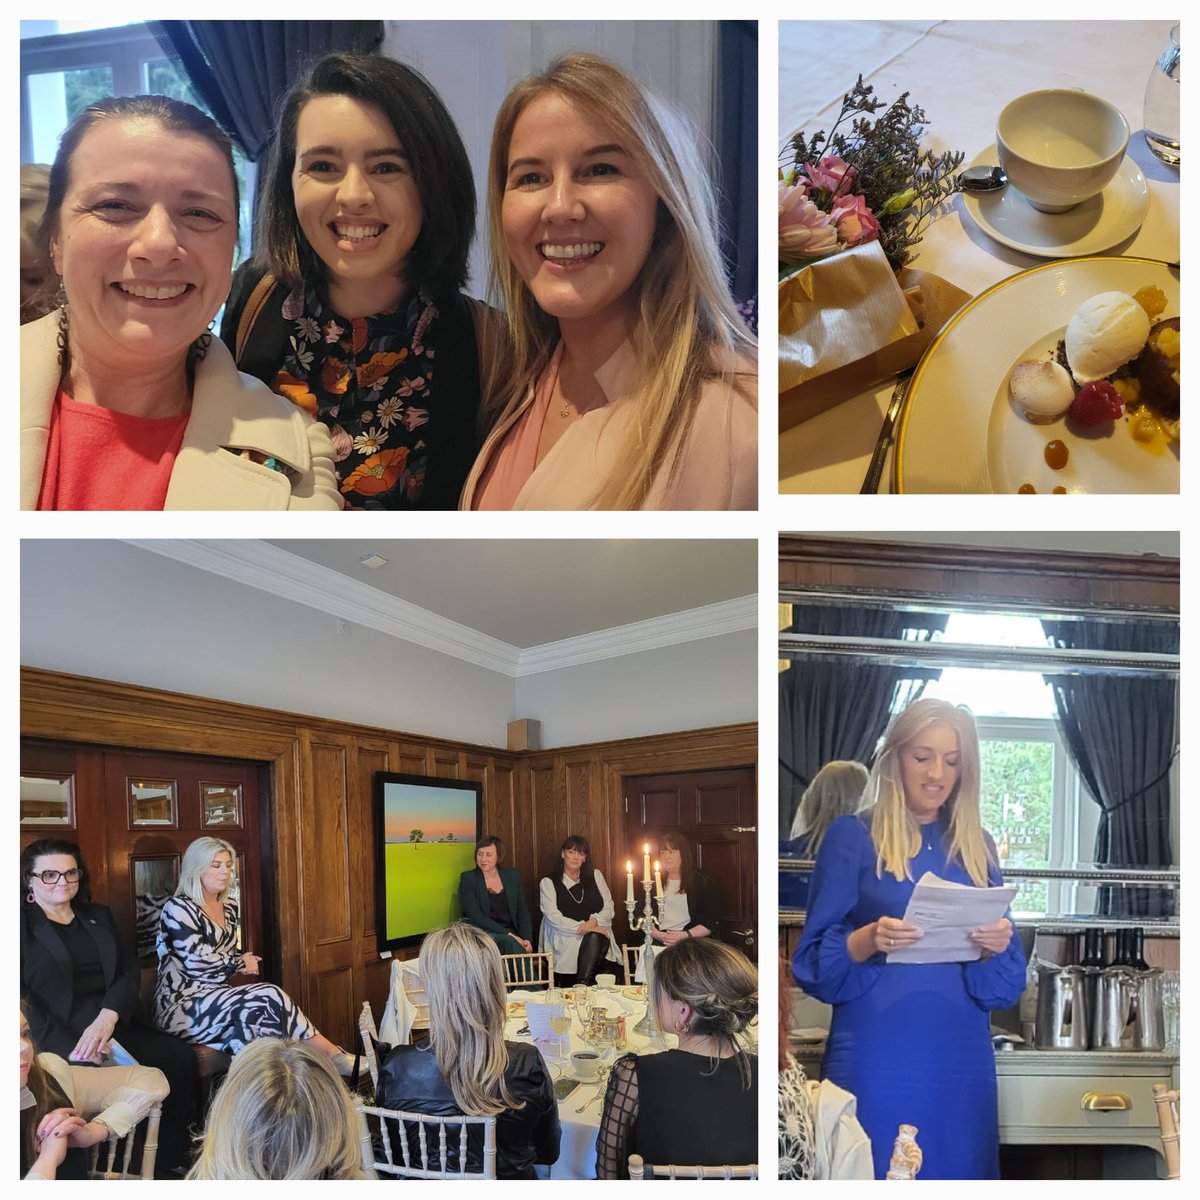 Thanks to Susan Walsh & the @PTSBIreland team for the opportunity to catch up with people I hadn't seen for a while at #IWD2024 lunch in @HayfieldManor. Everyone has a story, and the speakers who shared theirs today were really brave and inspirational.